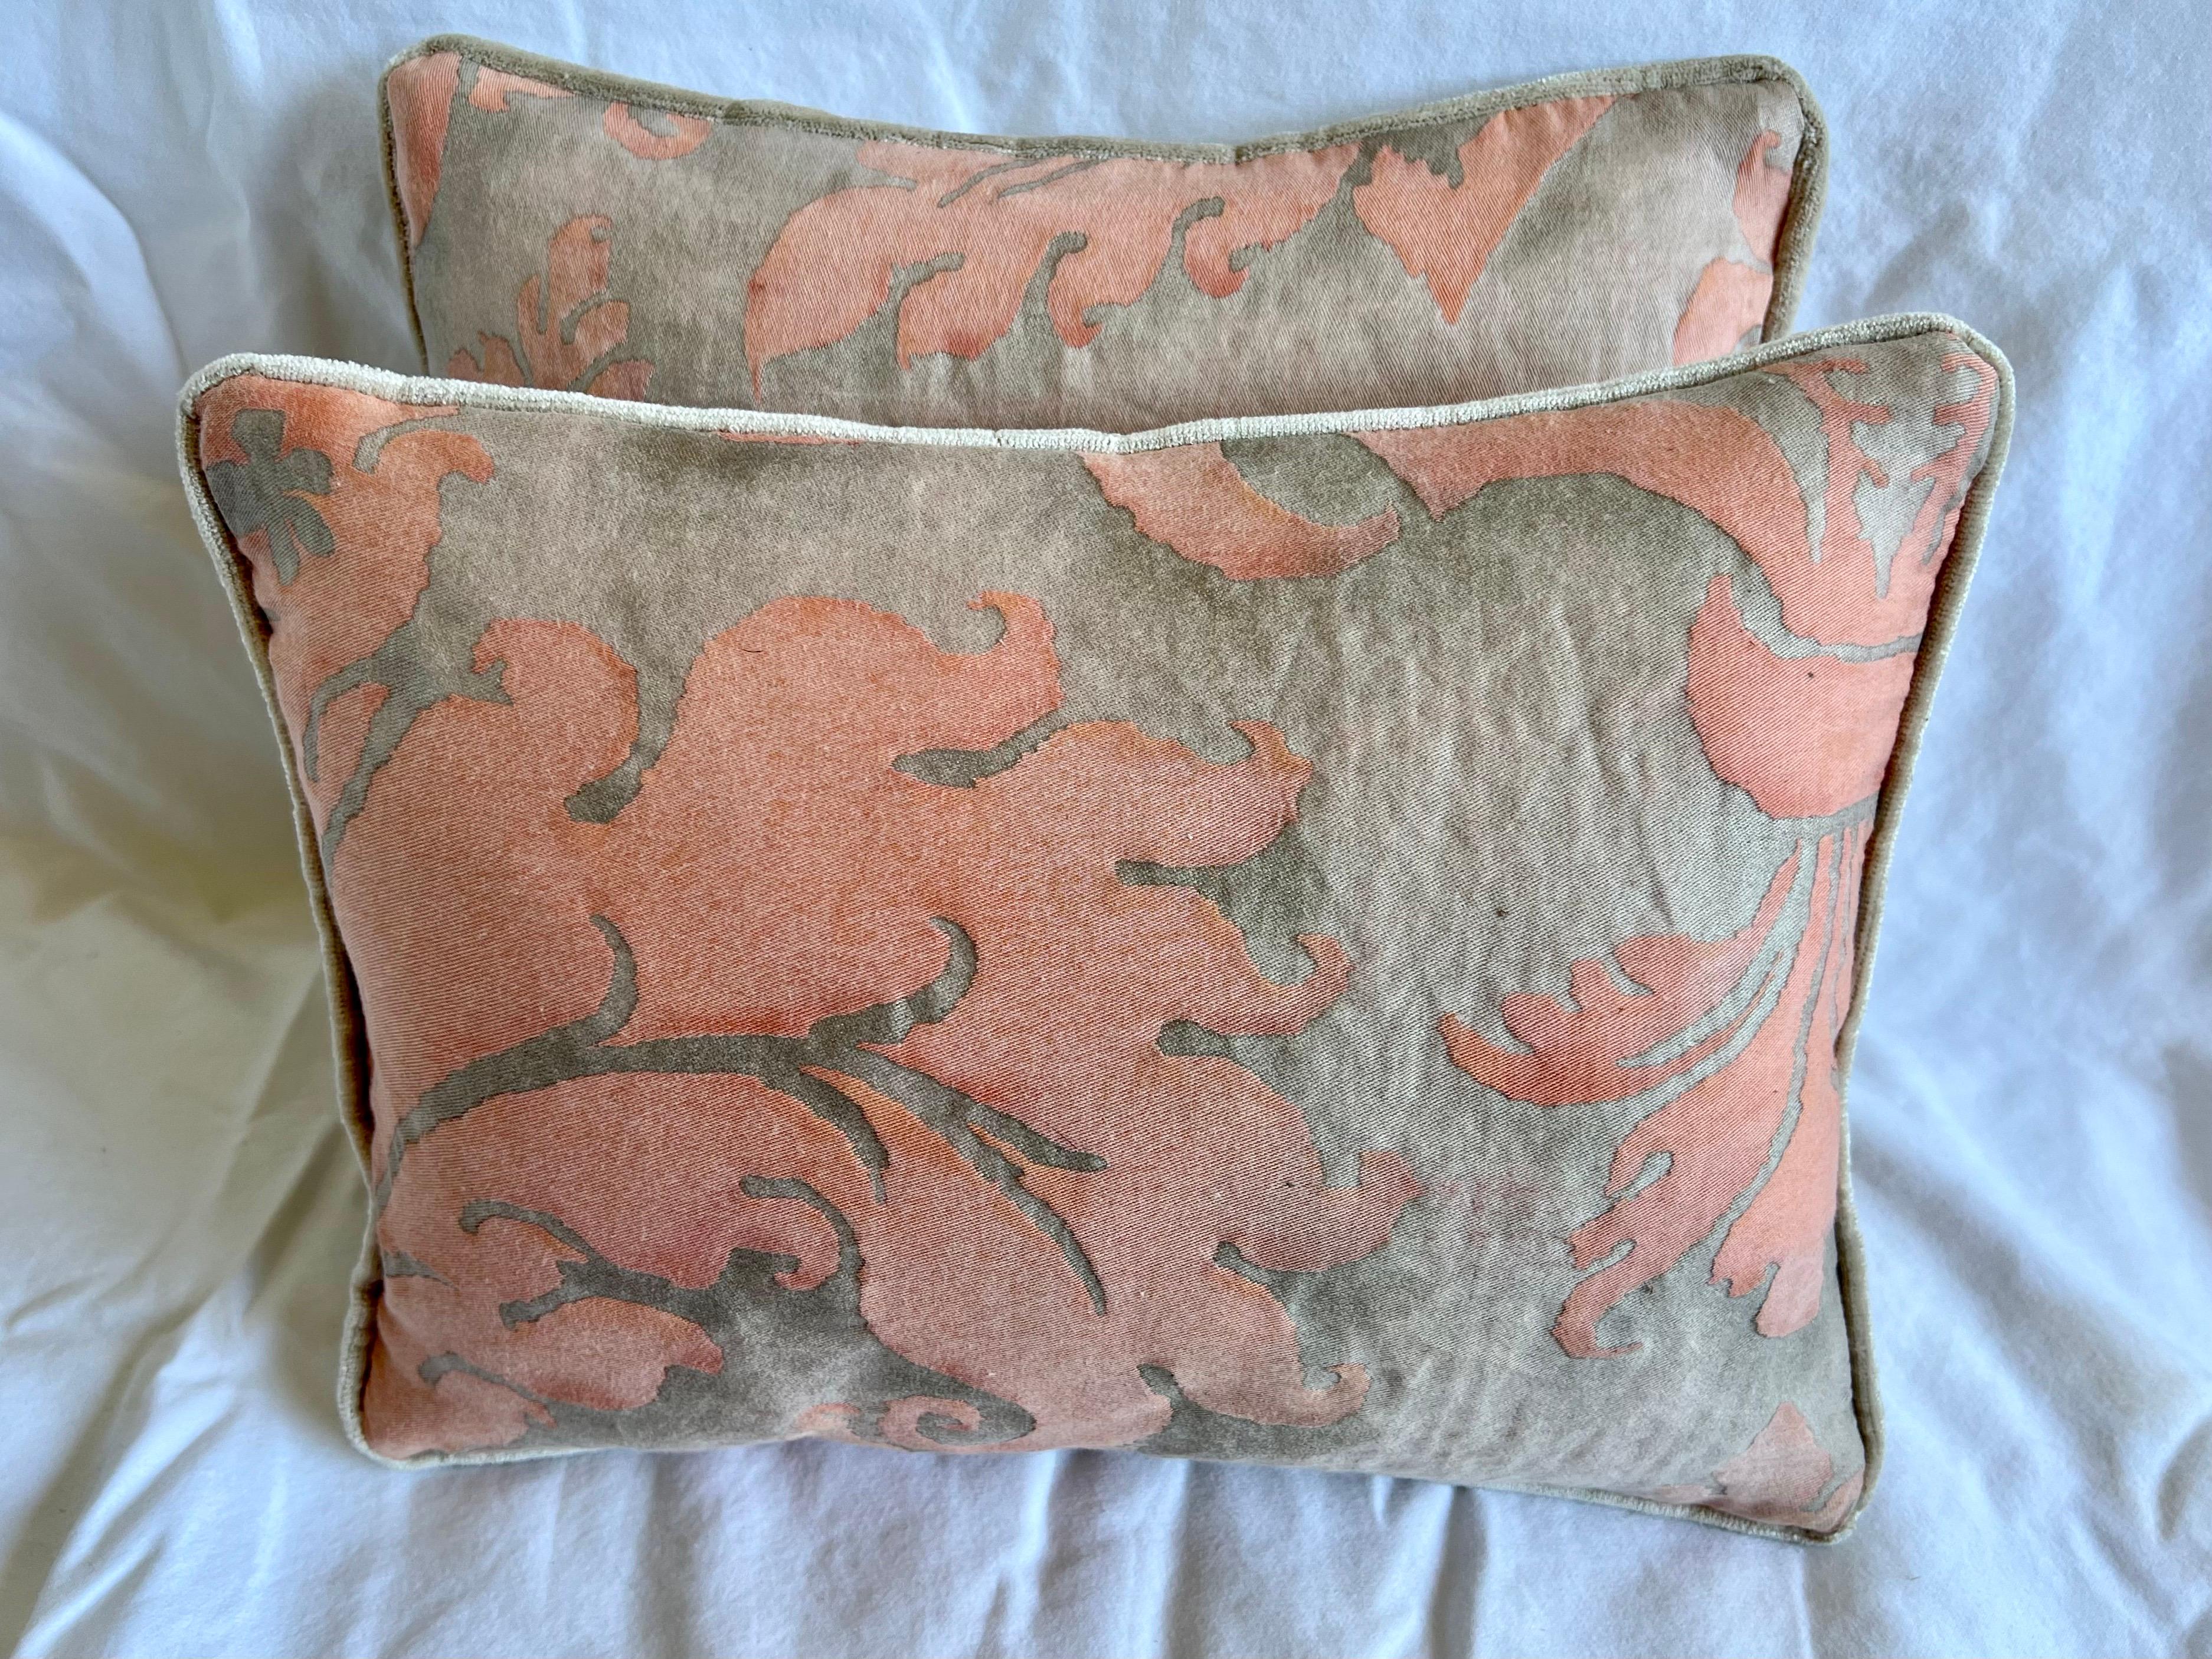 Pair of custom petite pillows made with vintage Fortuny printed cotton fronts and Belgium linen backs. Down inserts.